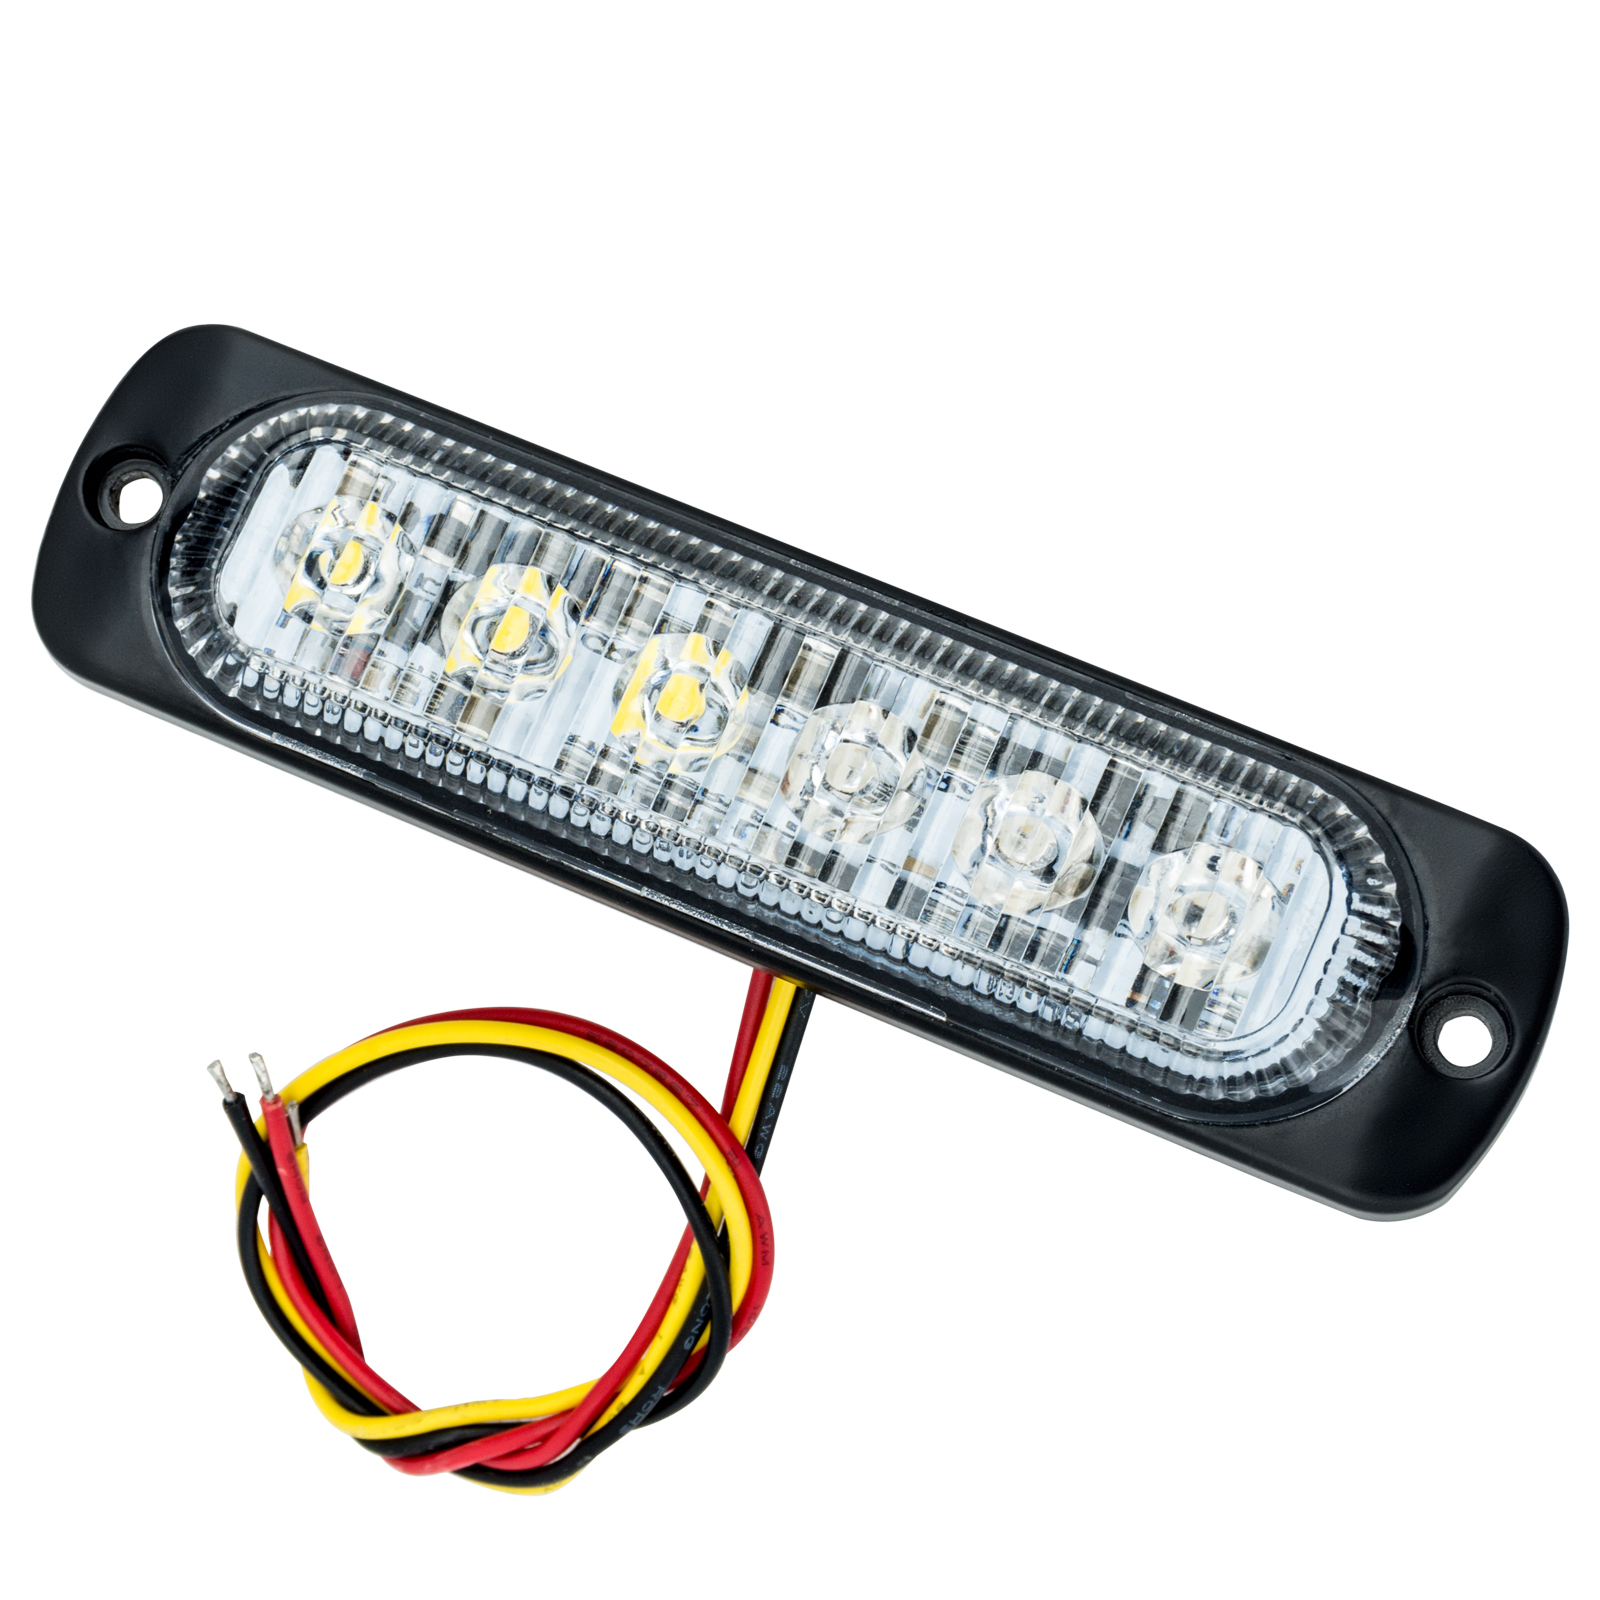 Picture of Oracle Lighting 3511-001 6 Led Slim Strobe, White